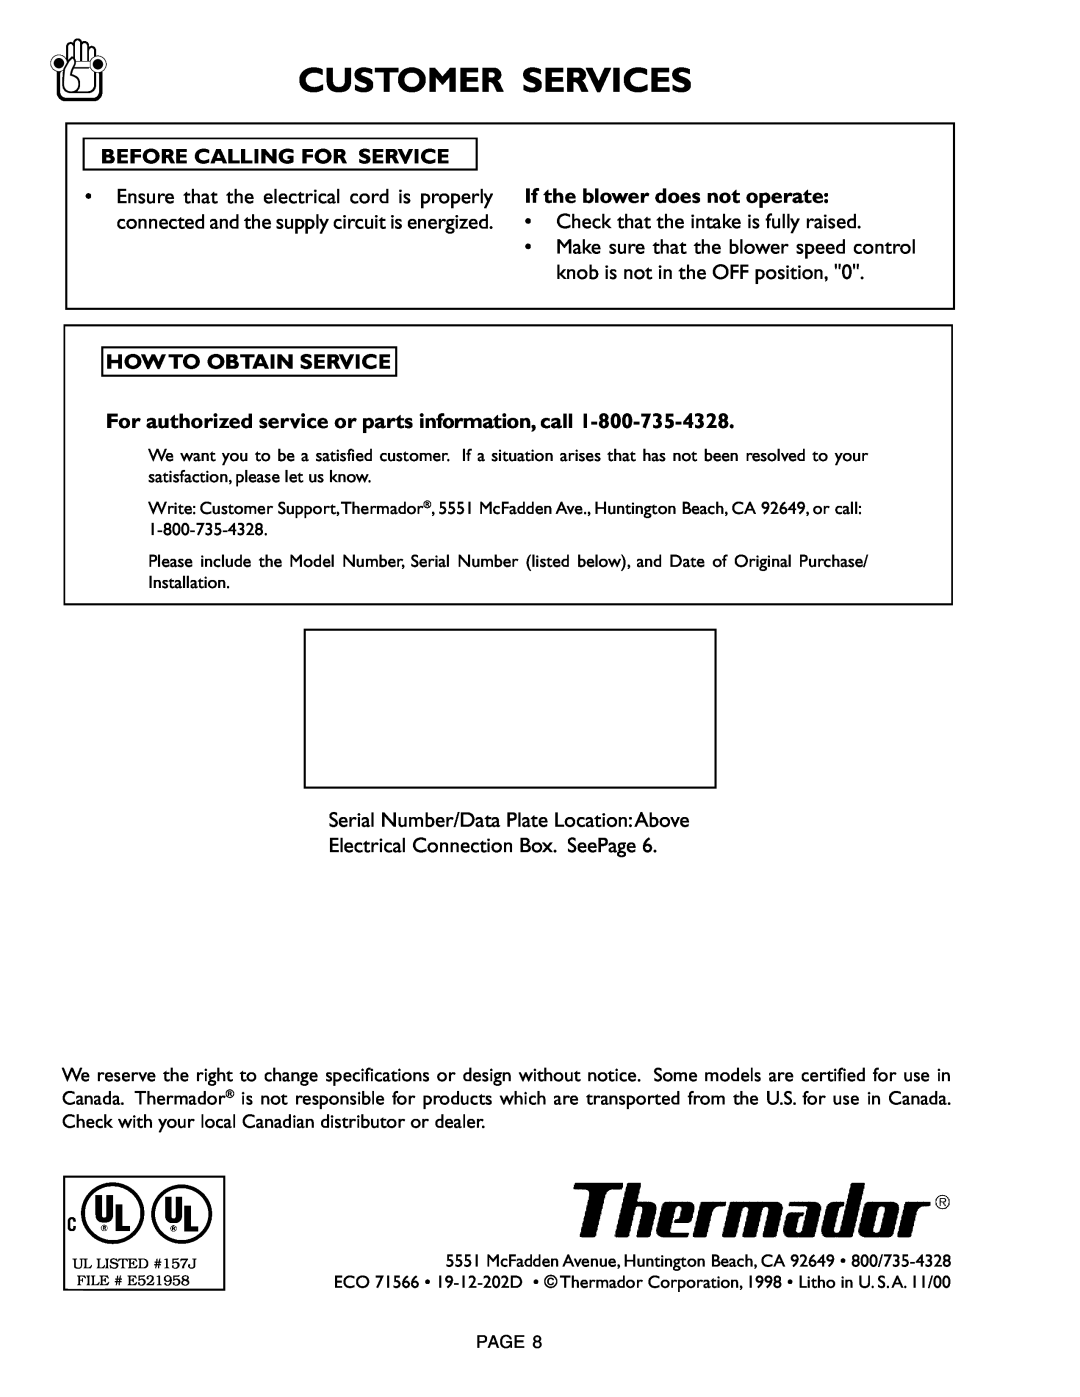 Thermador CVS36R 45 Before Calling For Service, If the blower does not operate, How To Obtain Service, Customer Services 